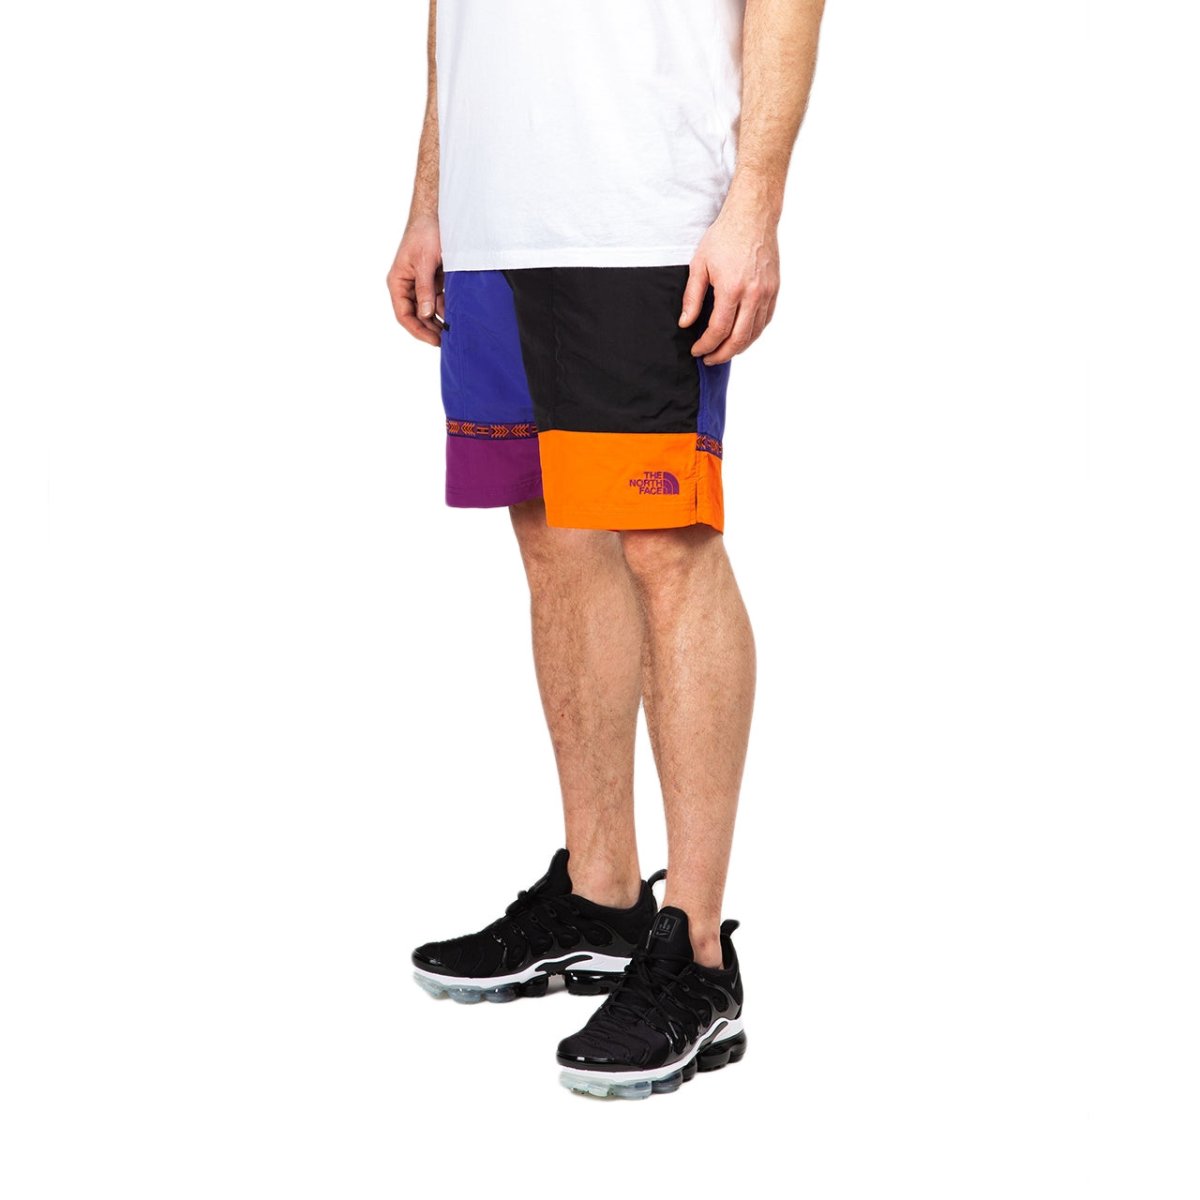 The North Face M 92 Rage Lounger Short (Blau)  - Allike Store